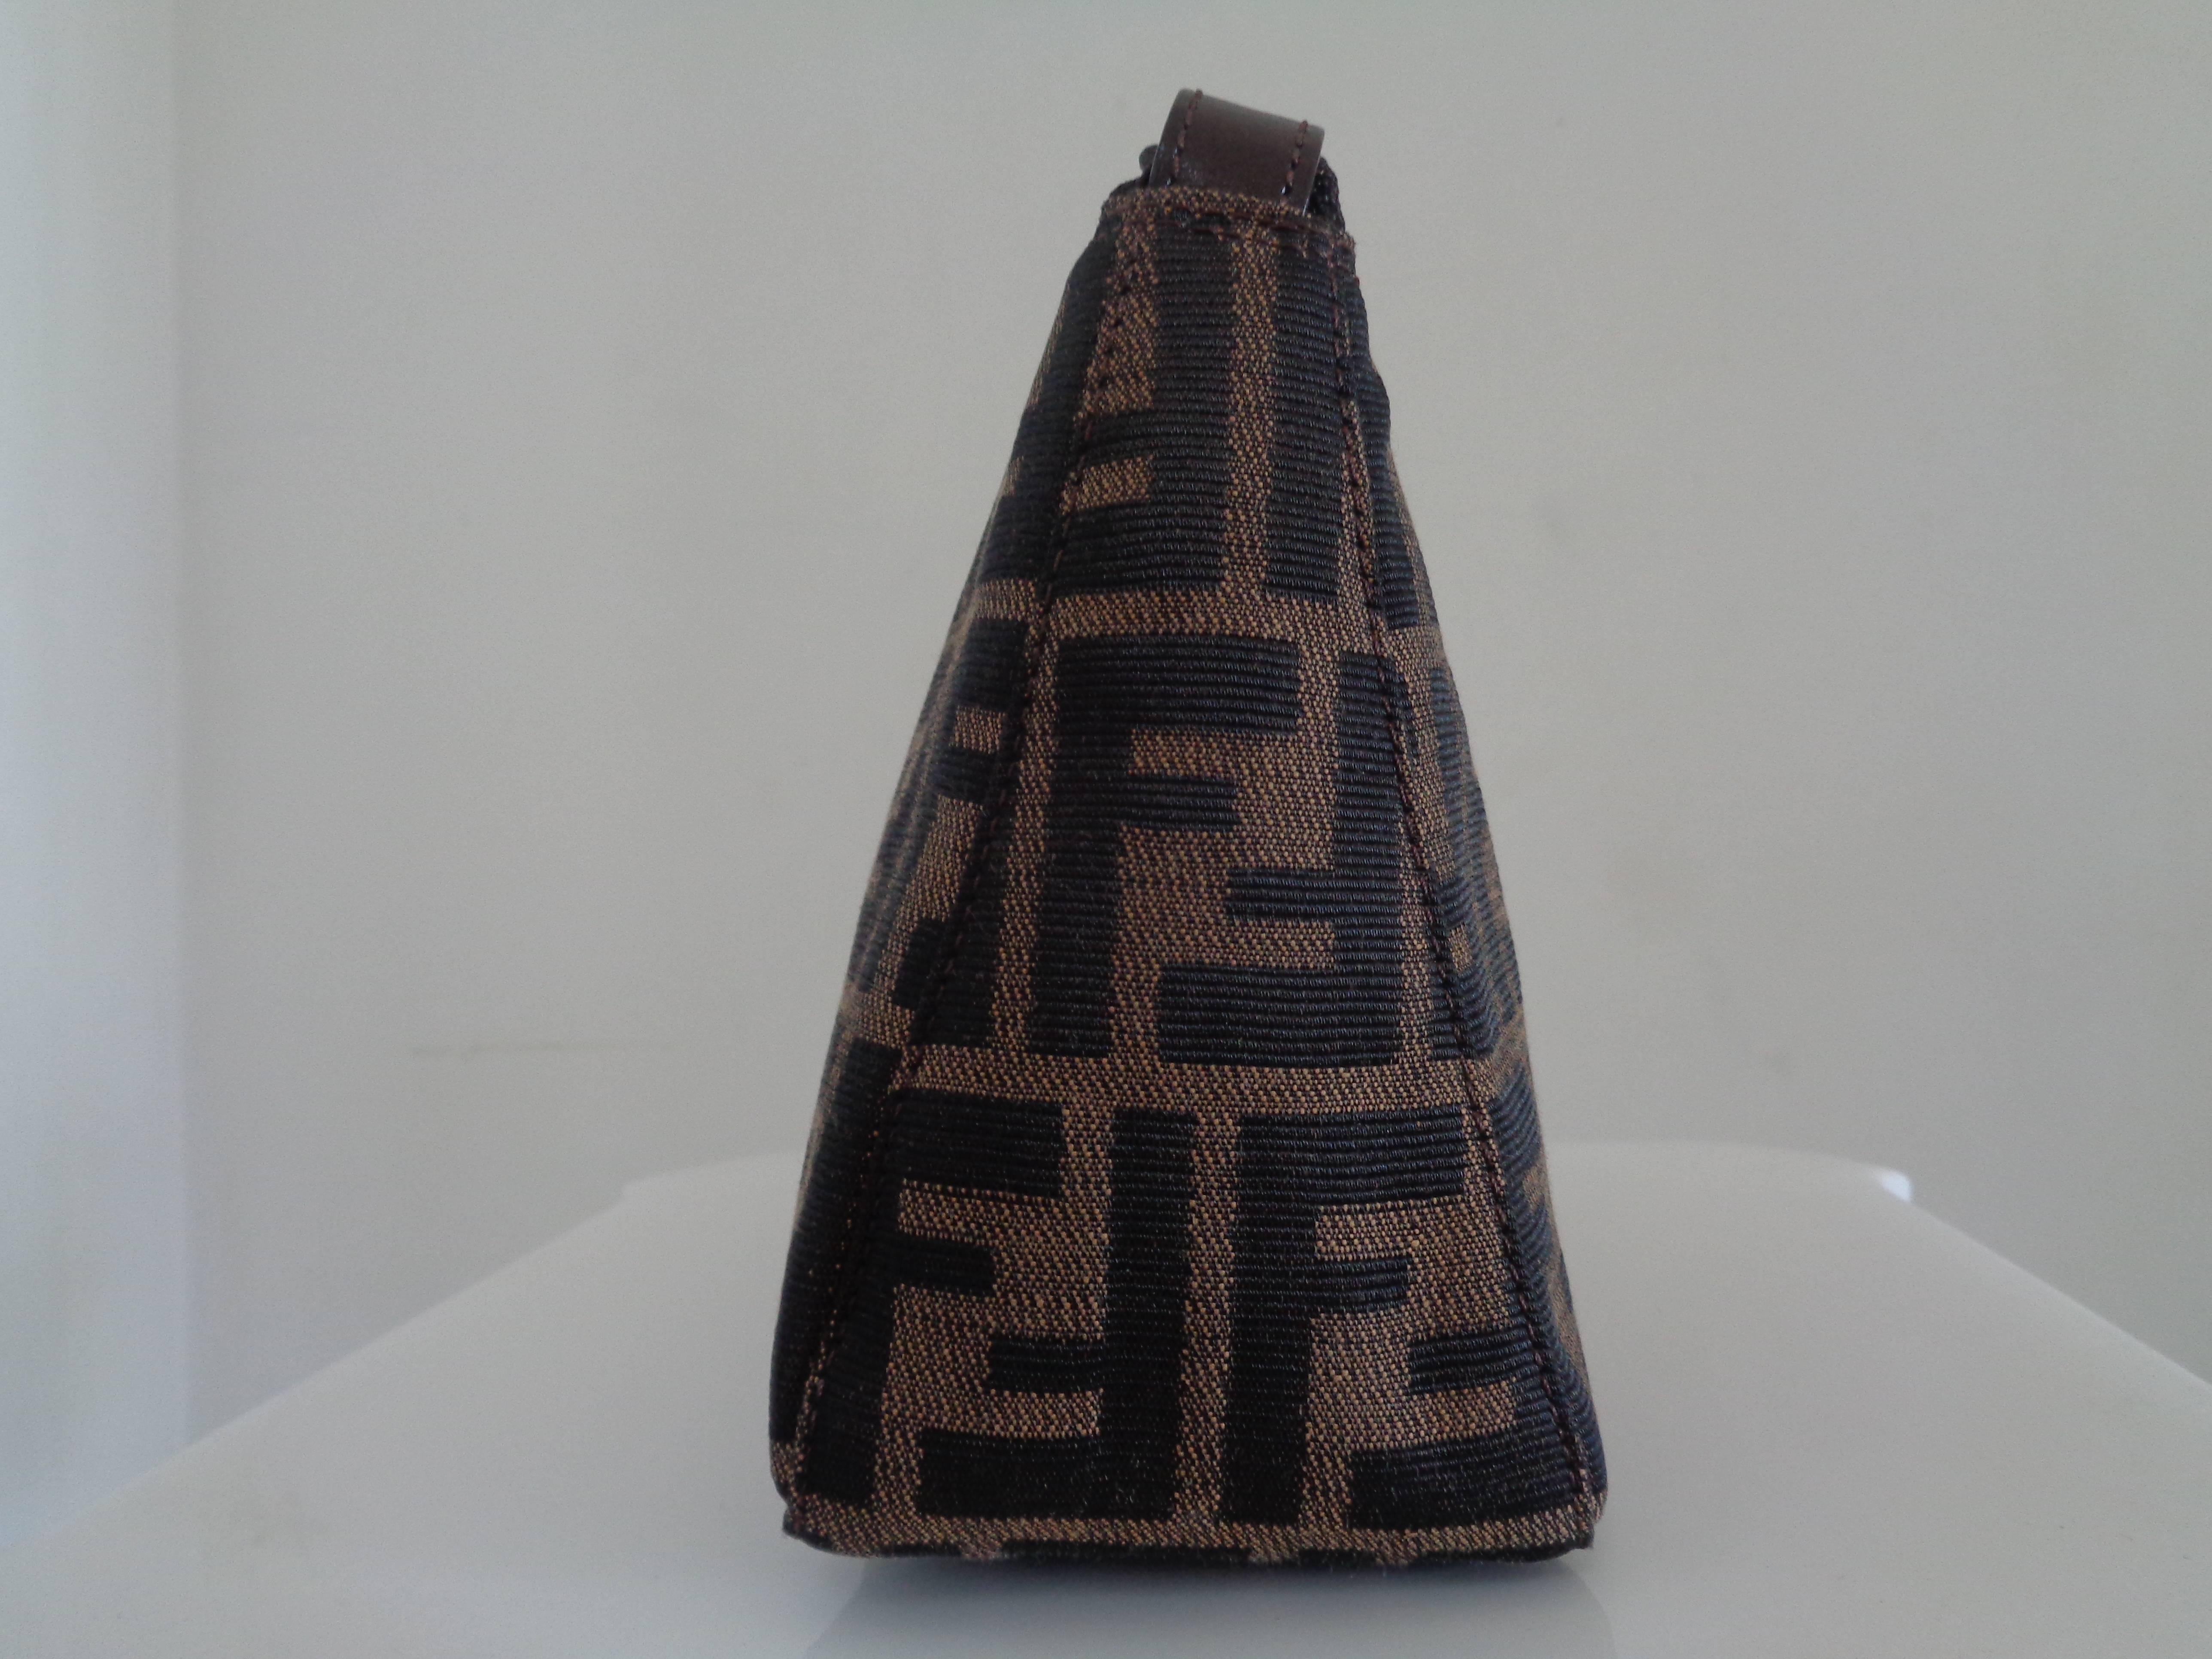 Fendi Brown Monogram Small Bag
Totally made in italy